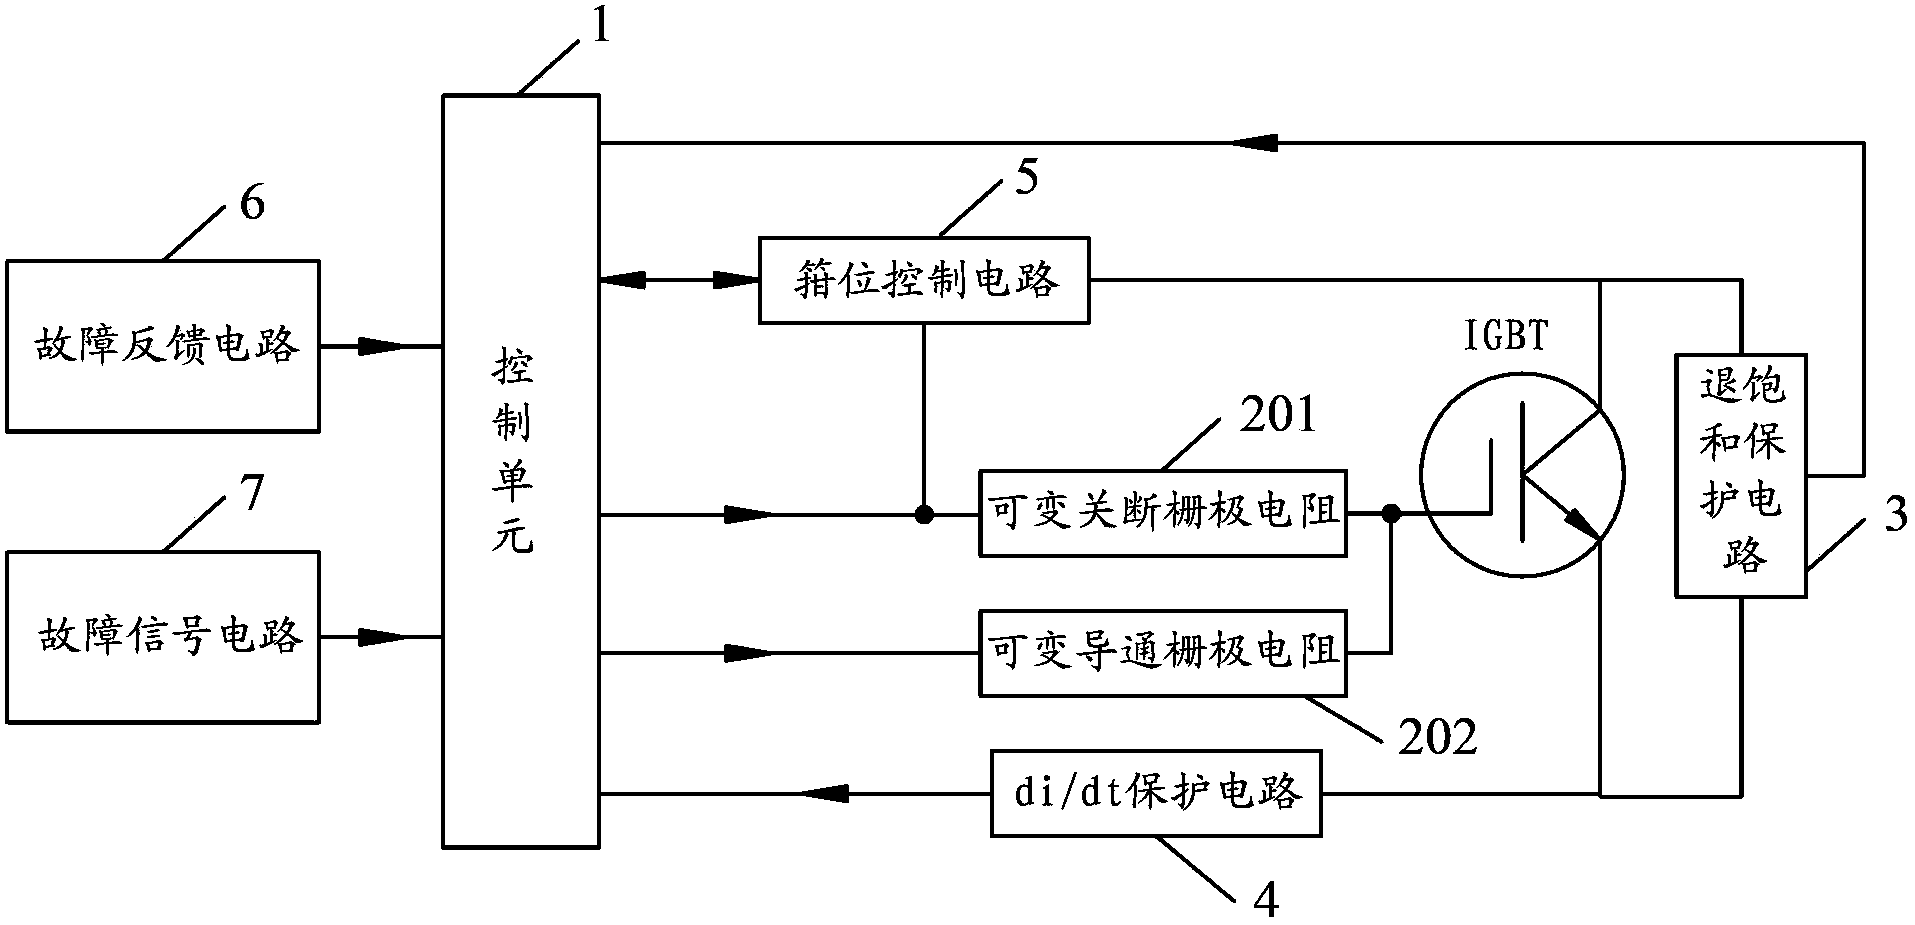 Protective circuit of insulated gate bipolar transistor